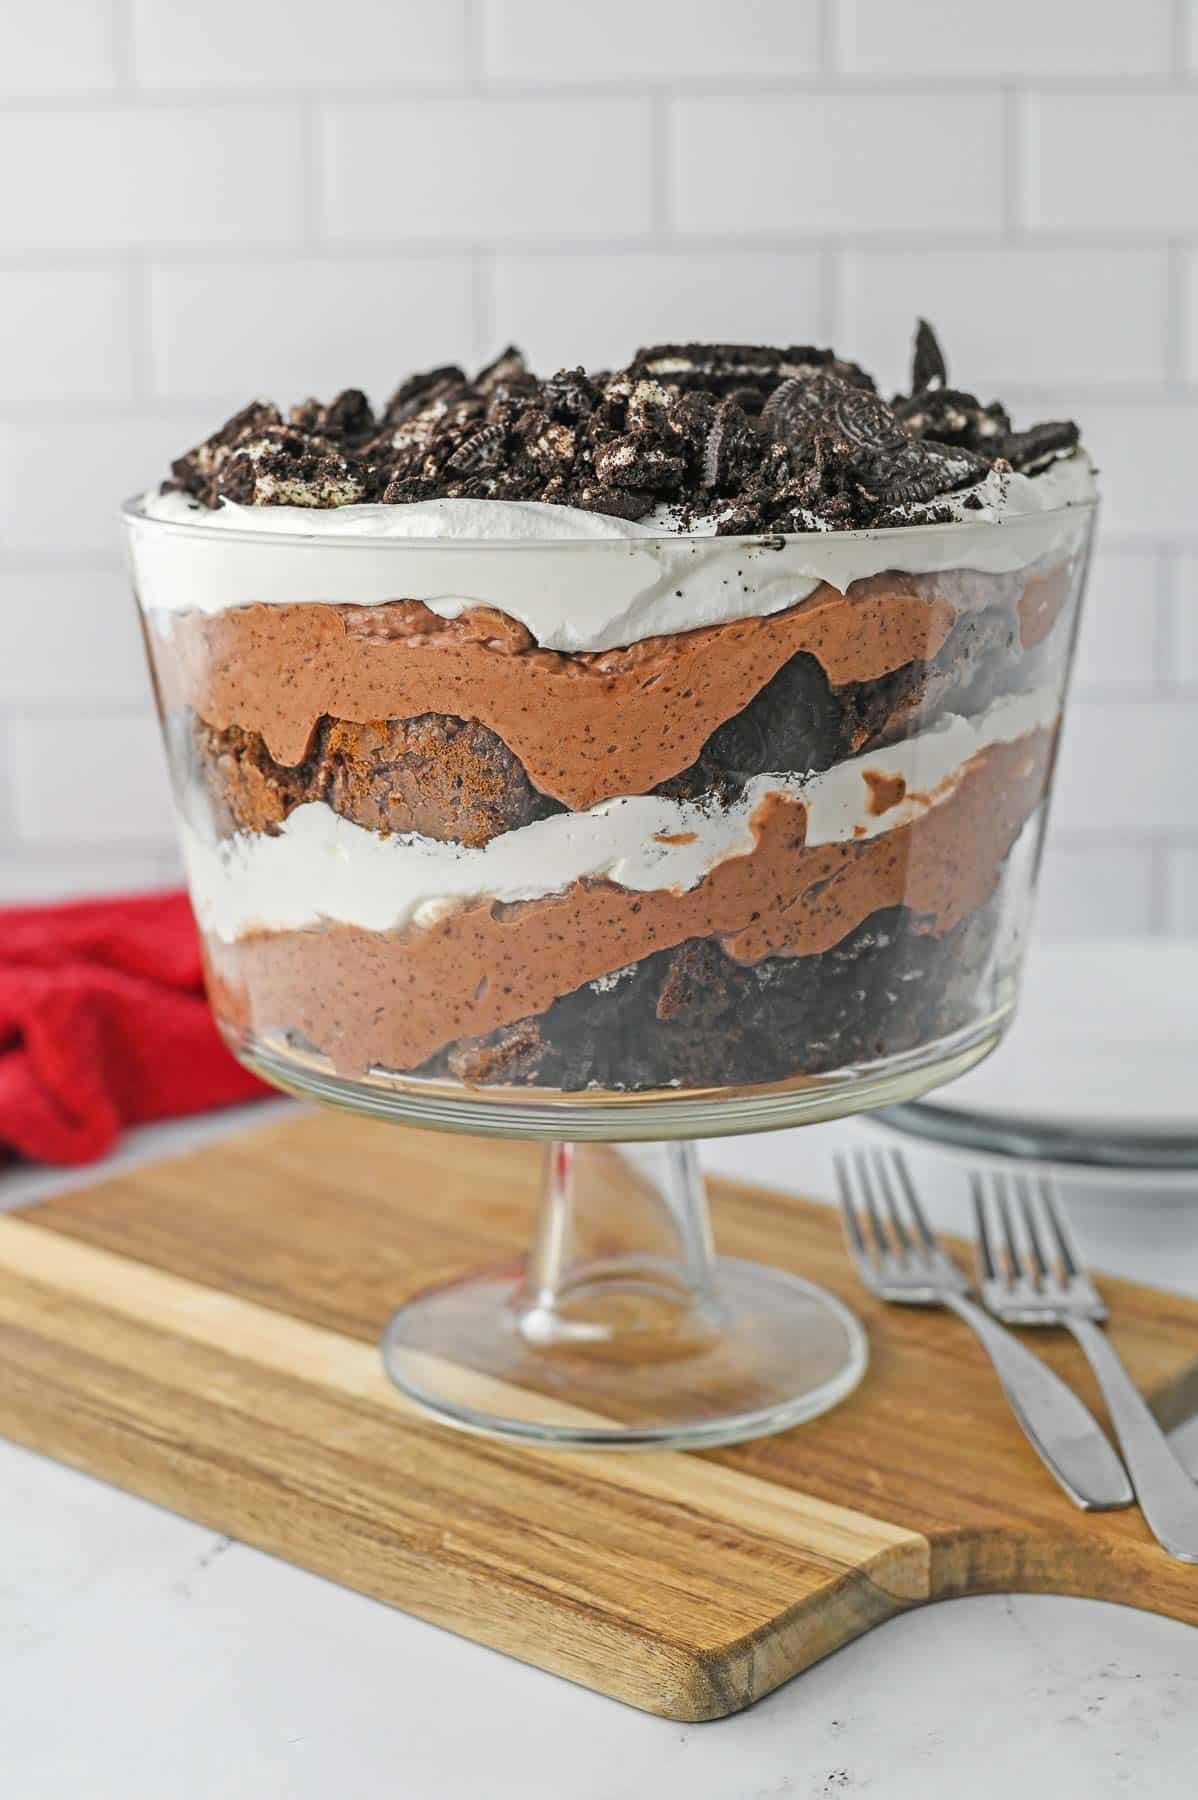 Brownie trifle in a large glass trifle dish.